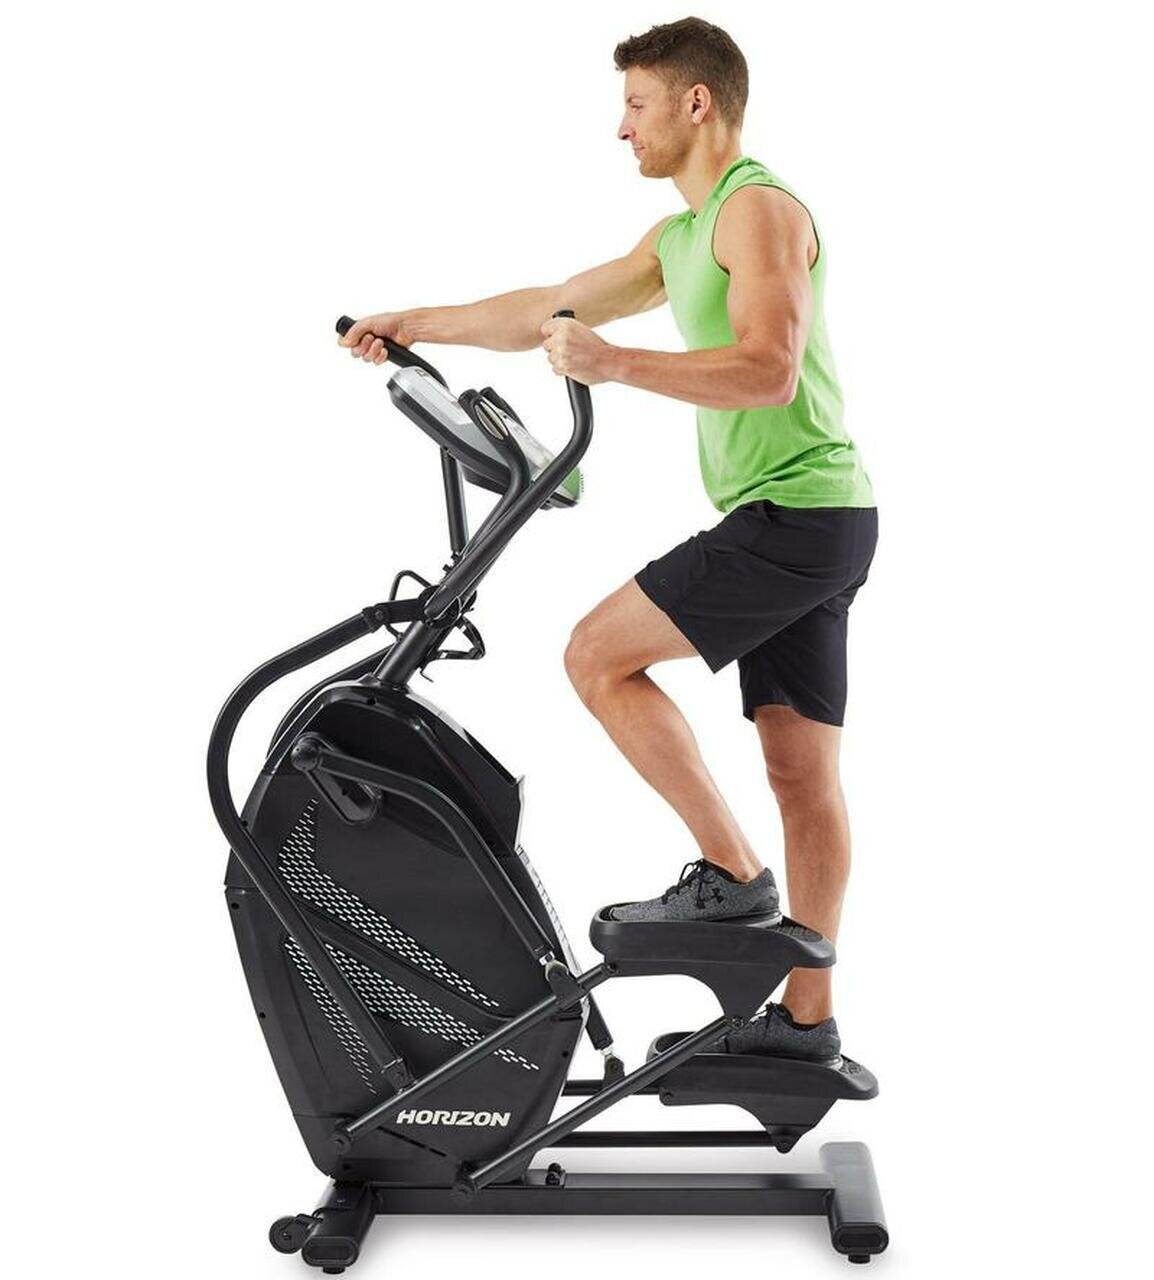 Horizon HT5.0 Peak Trainer Stepper - Buy Online - Ph: 1800-370-766 -  AfterPay & ZipPay Available!